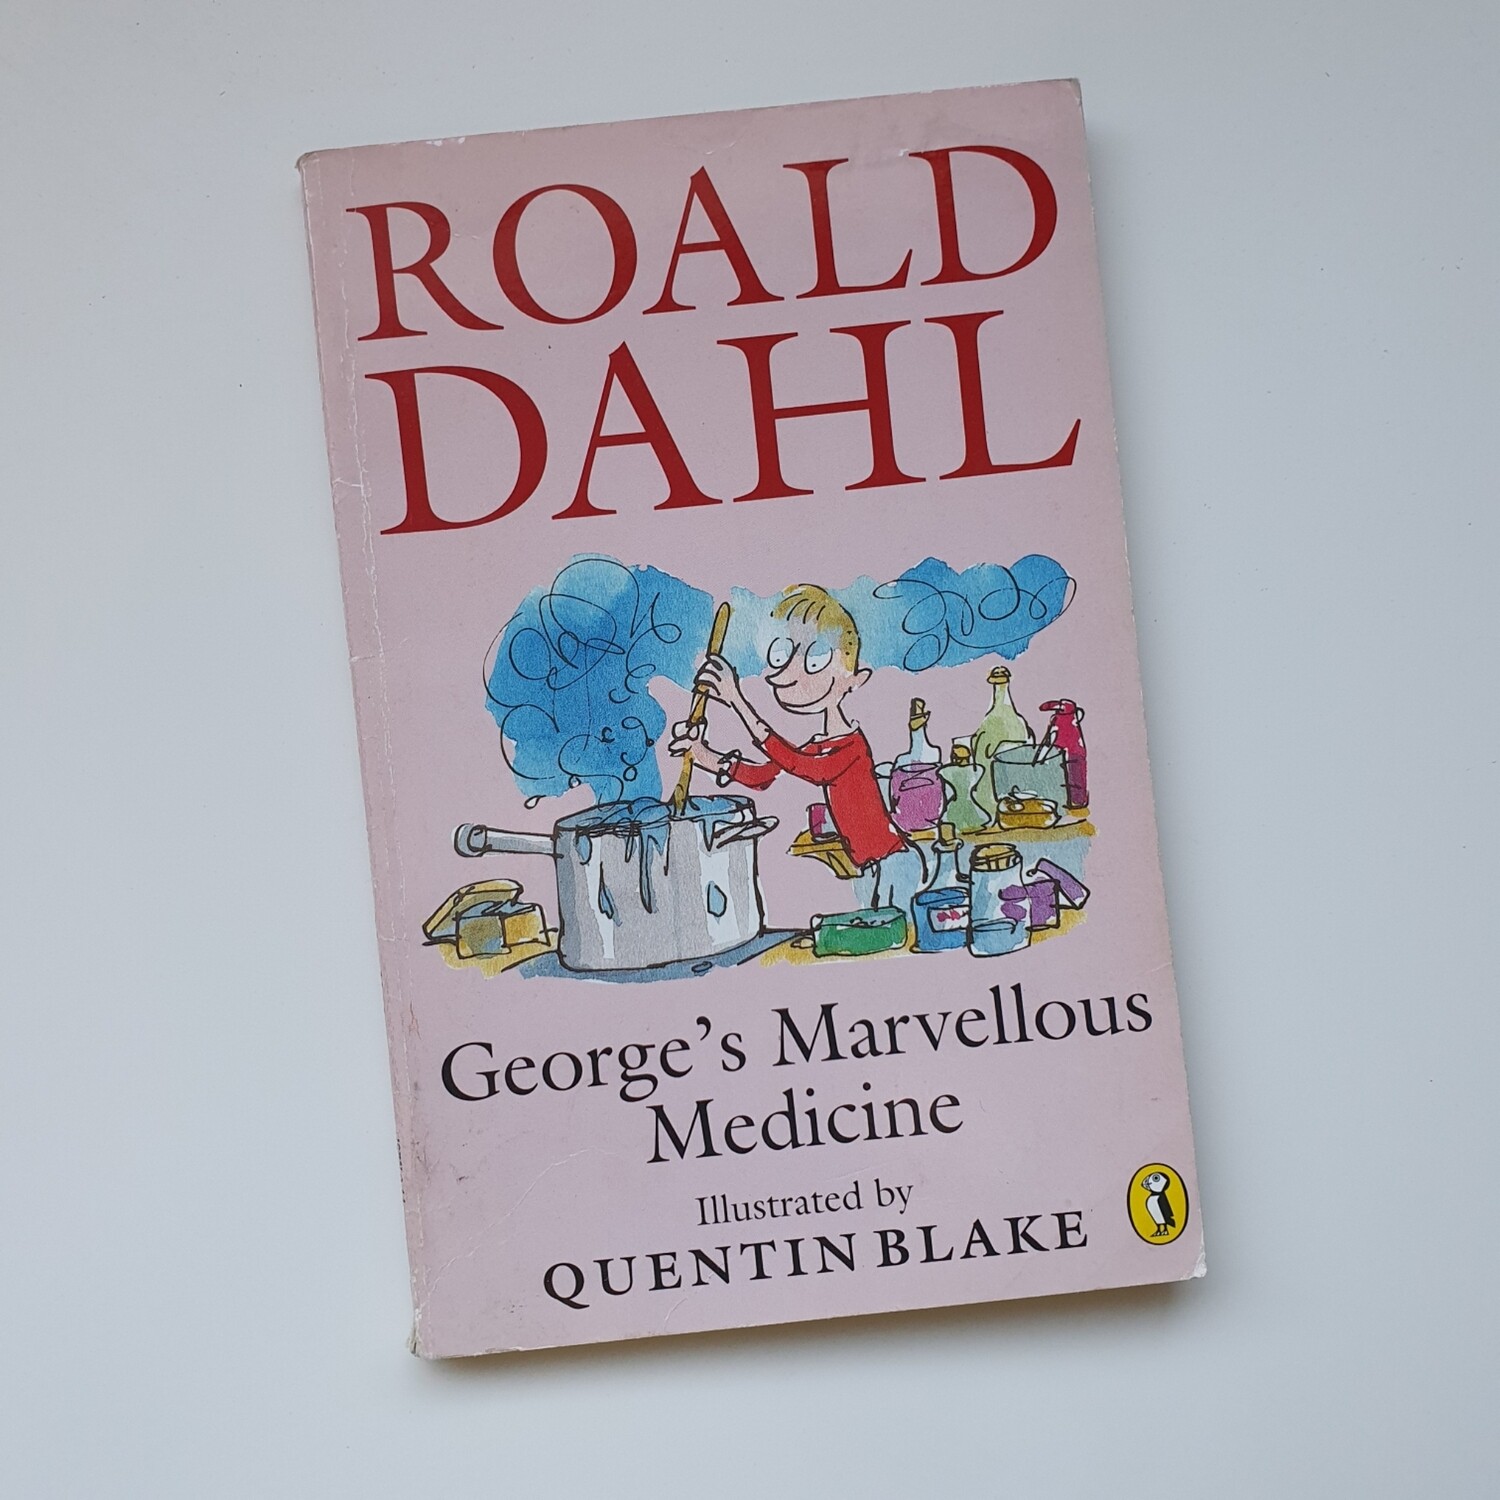 Roald Dahl George's Marvellous Medicine Notebook - made from a paperback book